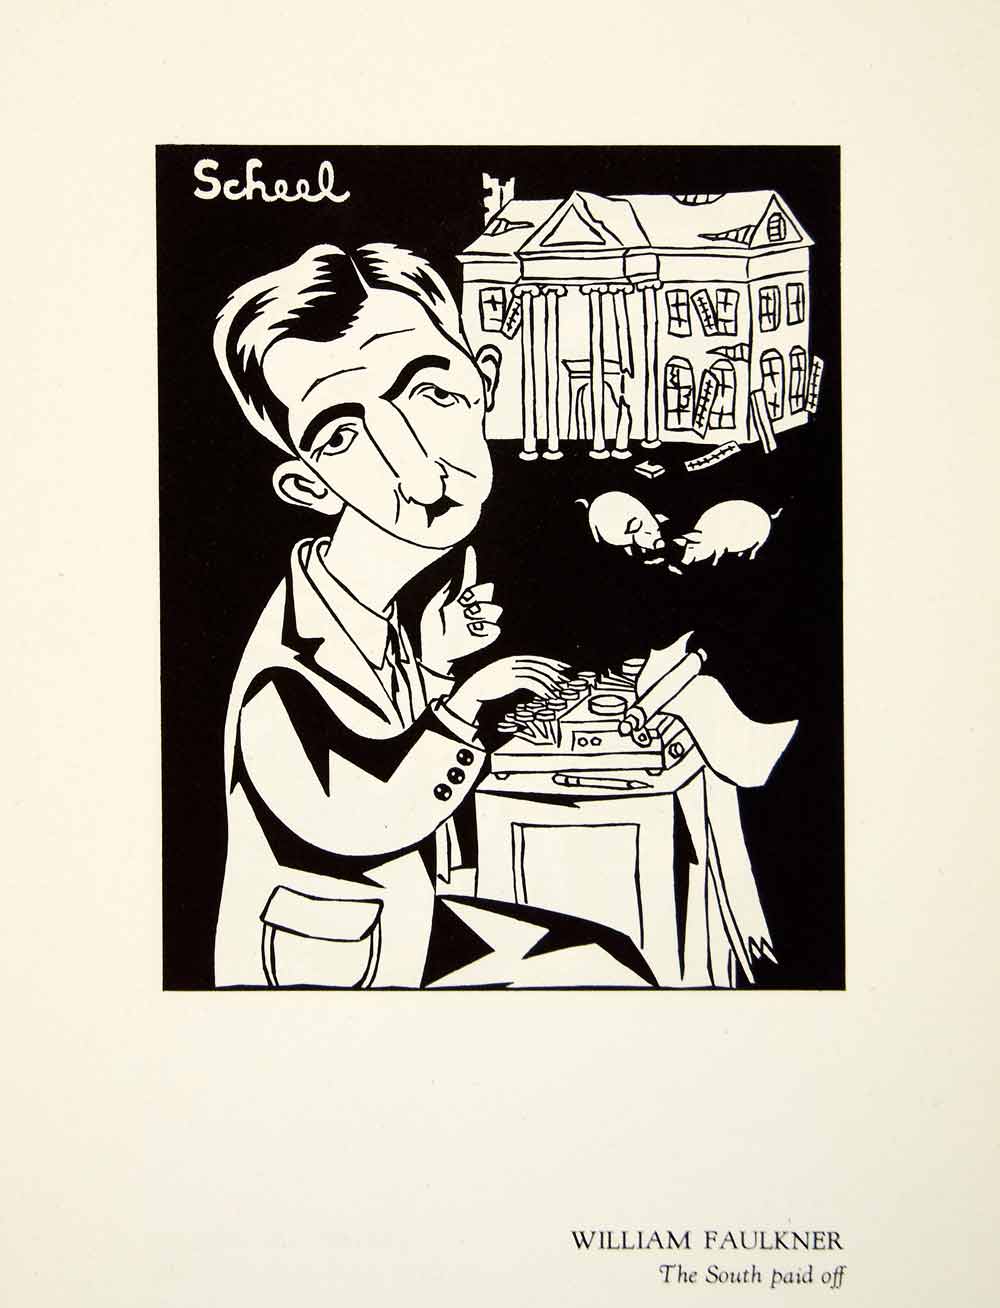 1951 Offset Lithograph William Faulkner South Paid Caricature Theodor Scheel